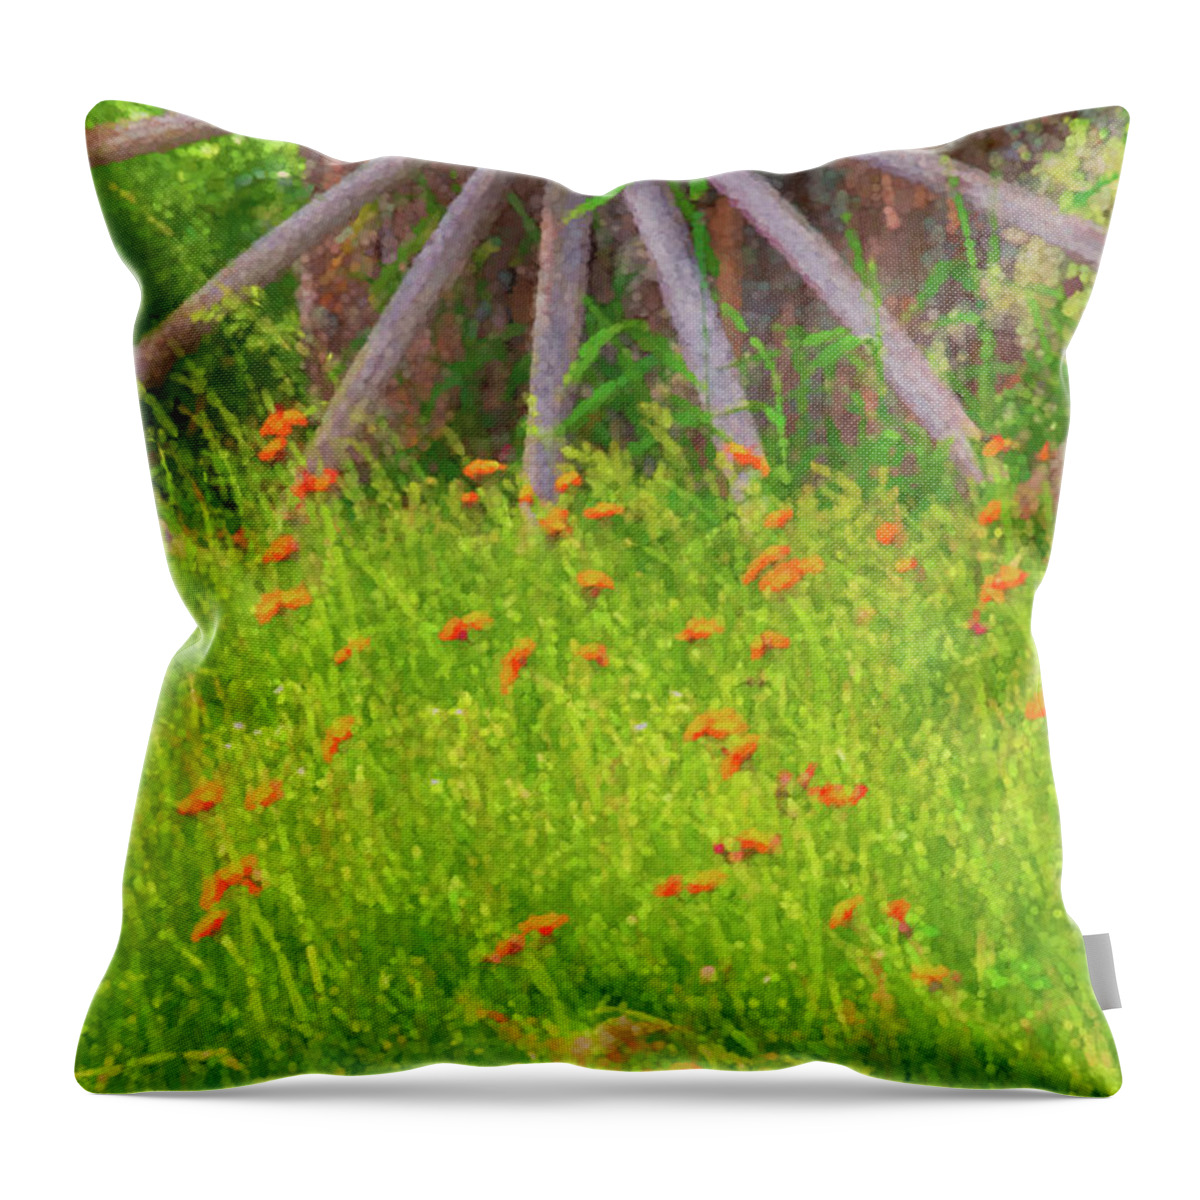 East Dover Vermont Throw Pillow featuring the photograph Indian Paintbrush Flowers by Tom Singleton